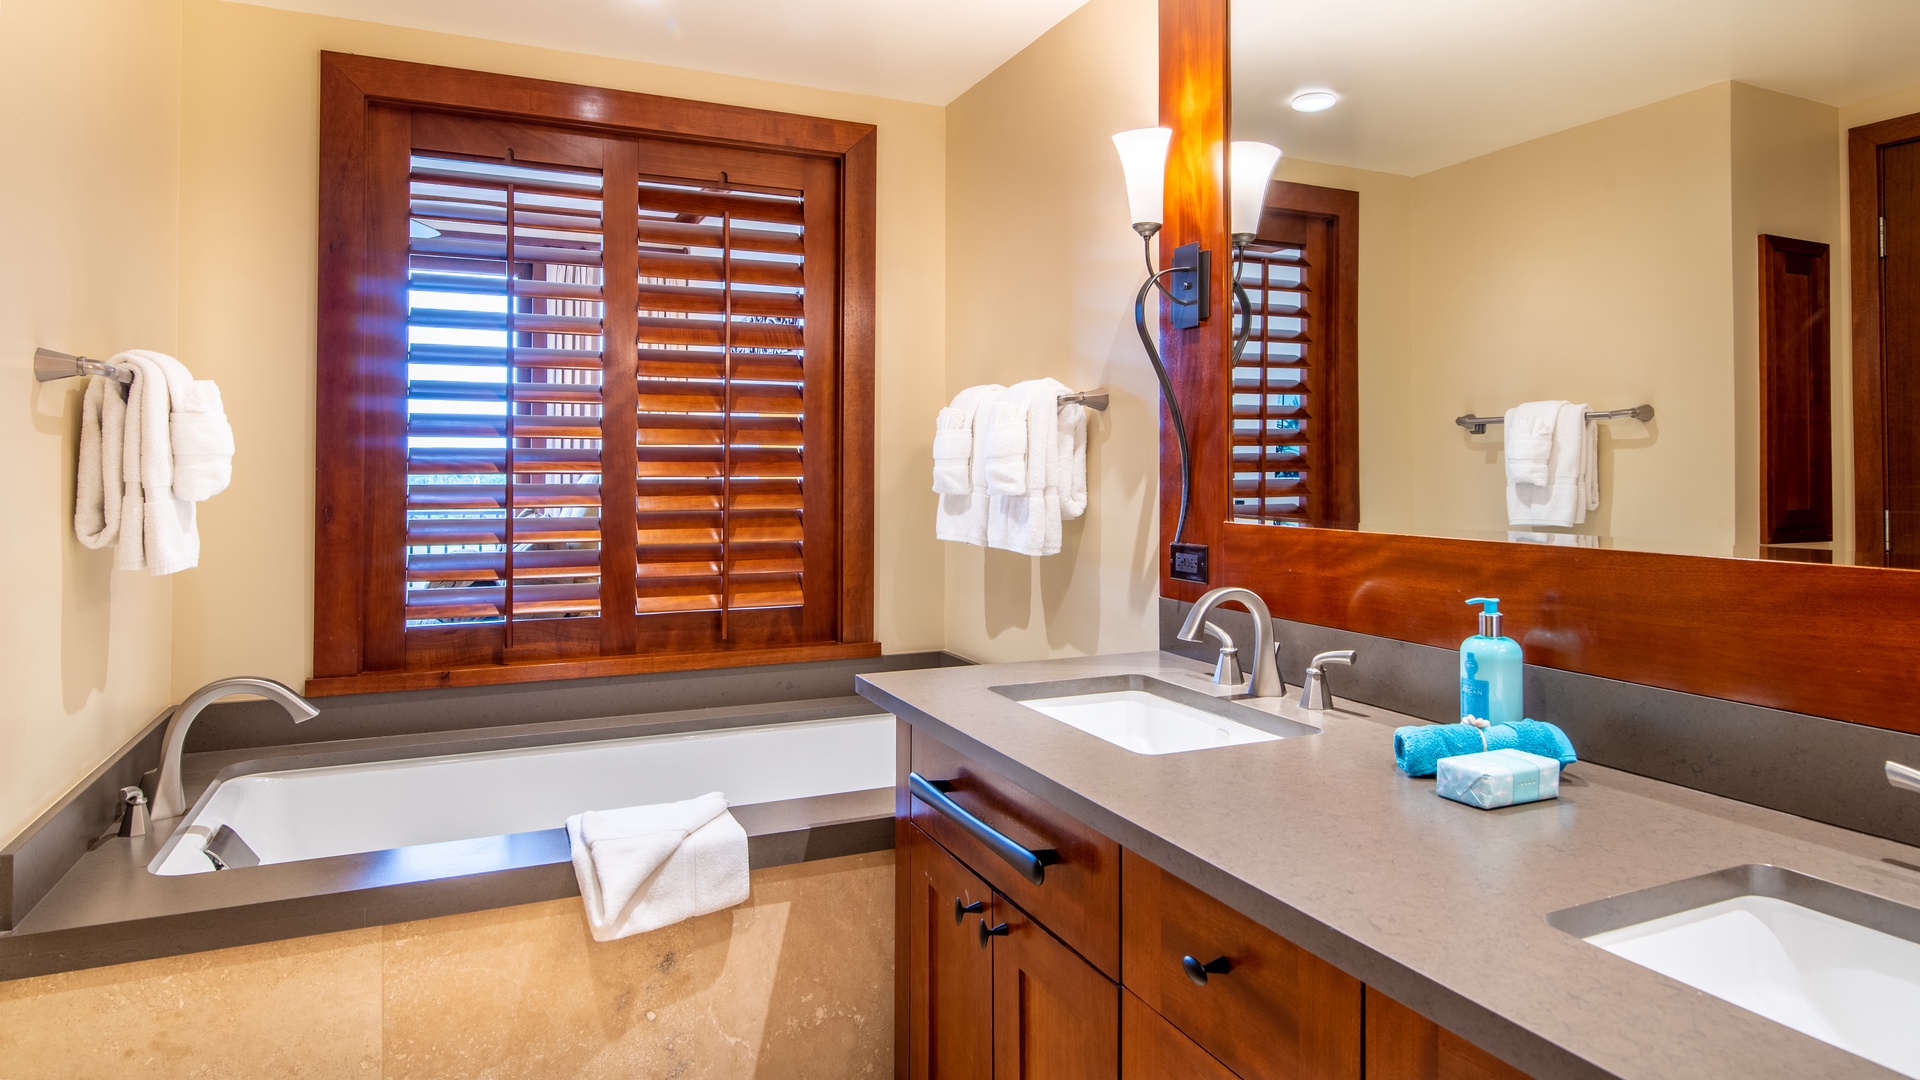 Kapolei Vacation Rentals, Ko Olina Beach Villas B608 - The primary guest bathroom has a walk-in shower and luxurious guest bath.